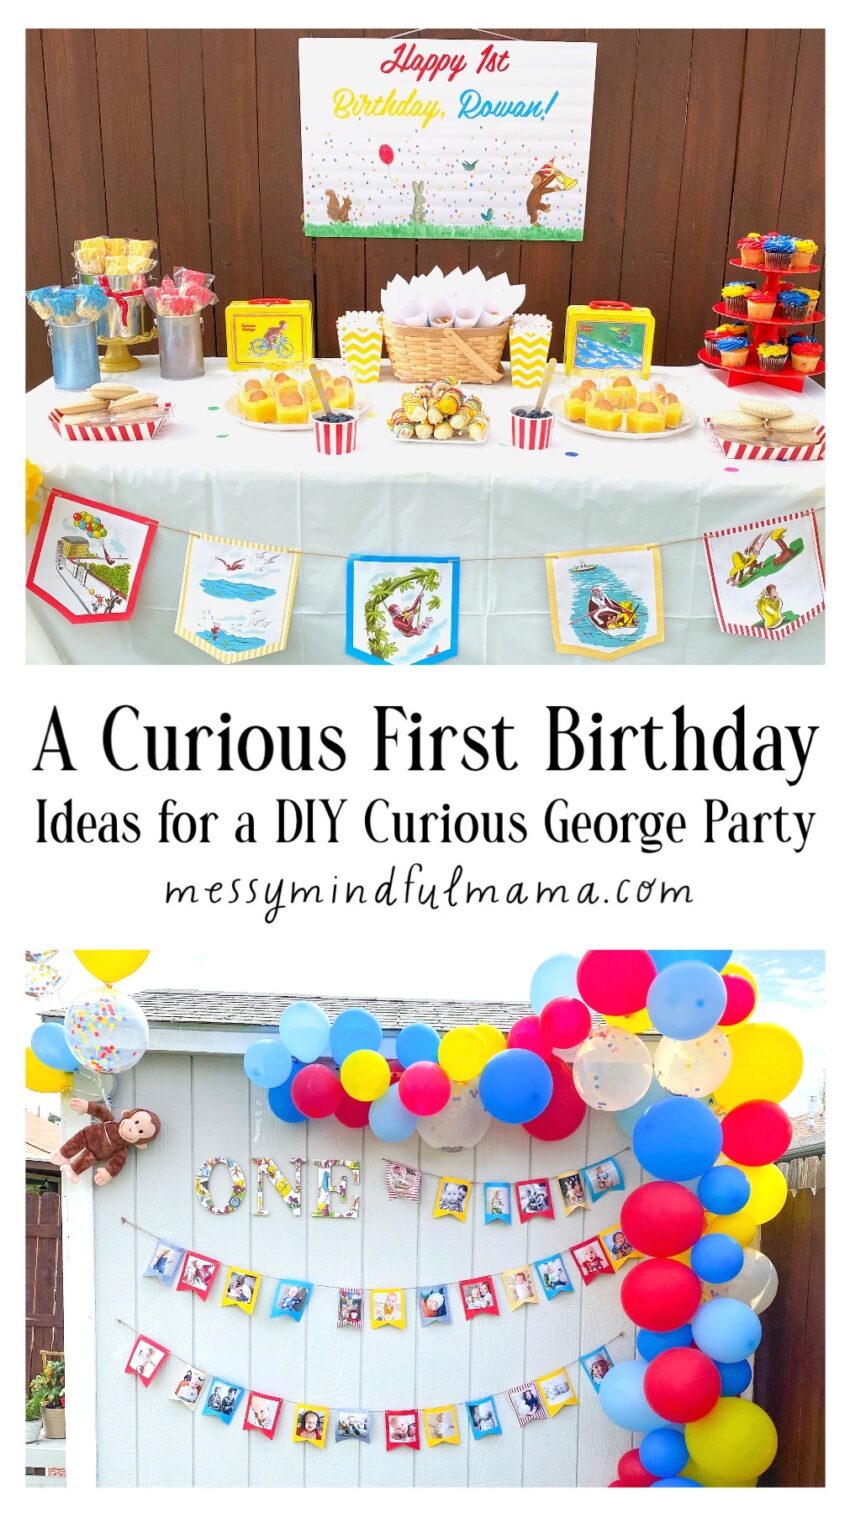 DIY Mini Letters, Party Favors, Birthday Activities, Birthday